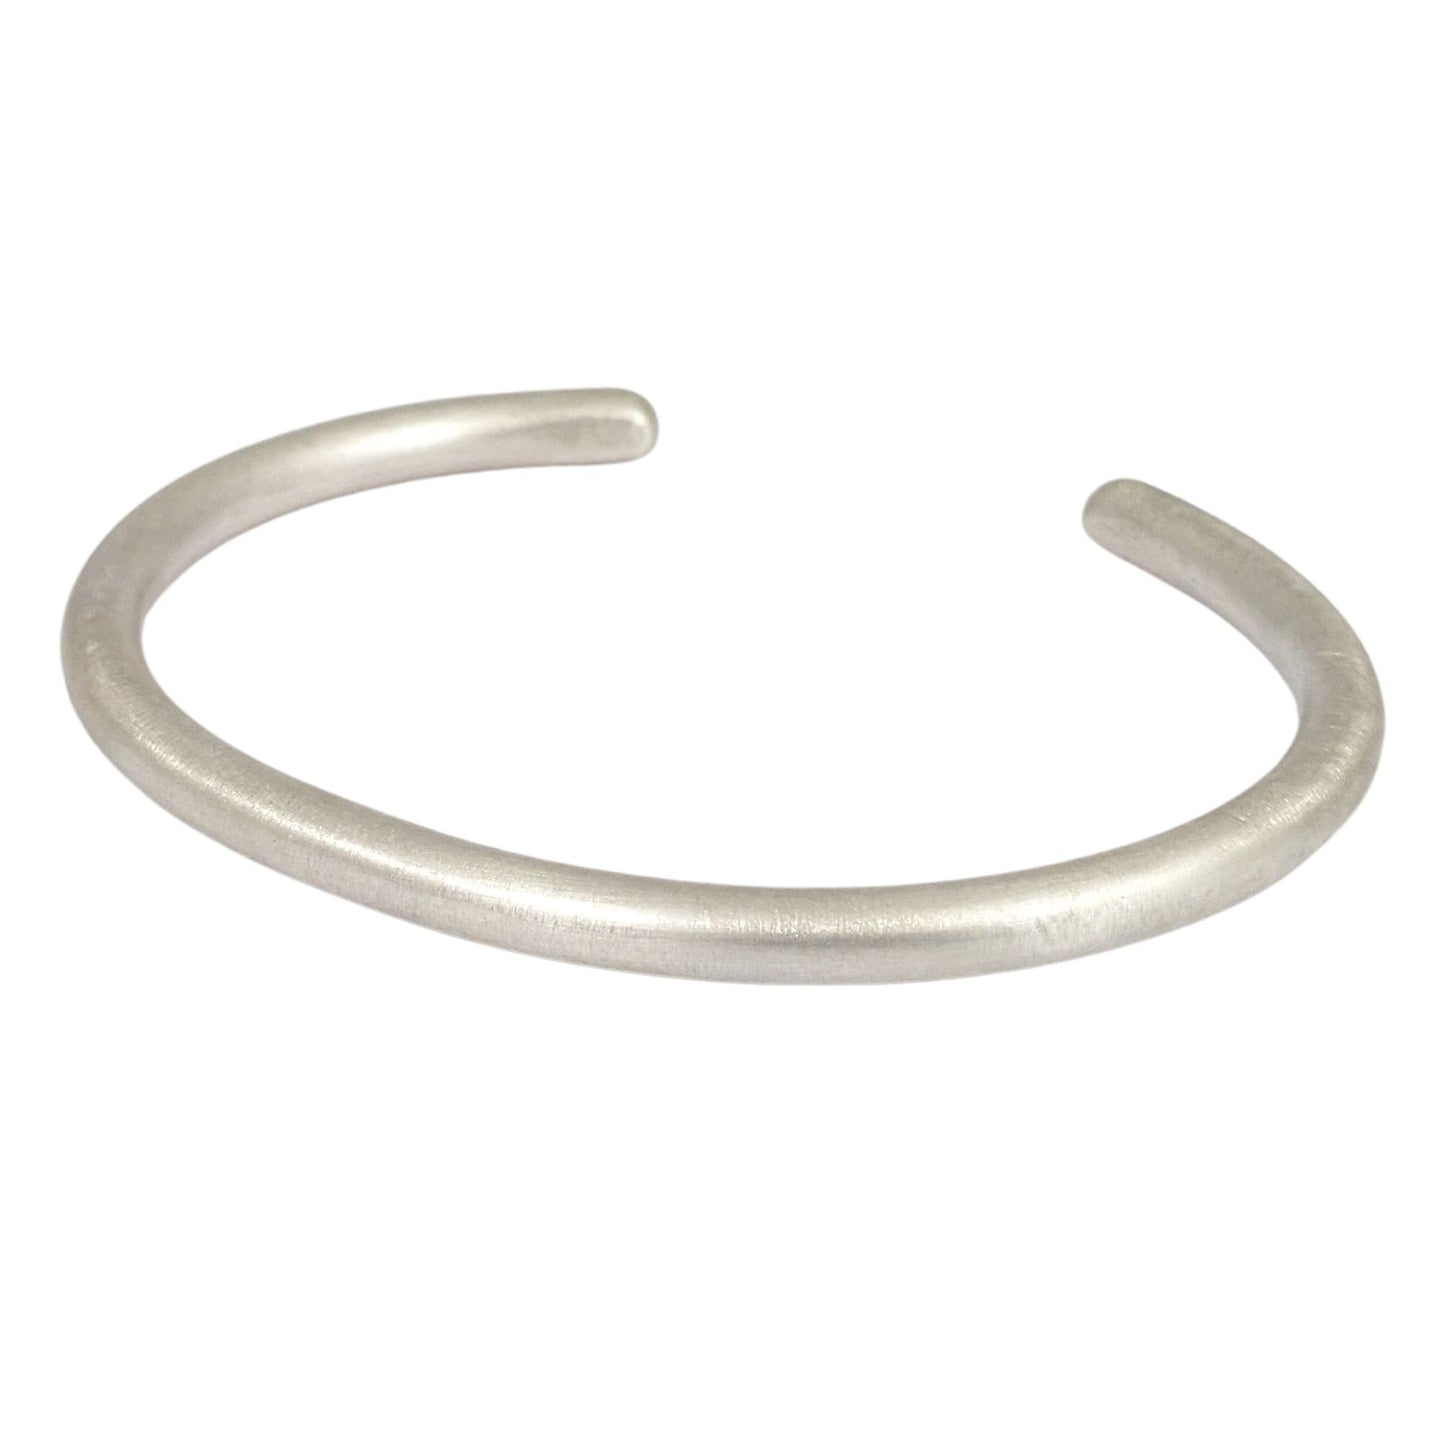 Heavy round sterling silver wire cuff bracelet.  For men or large wrist.